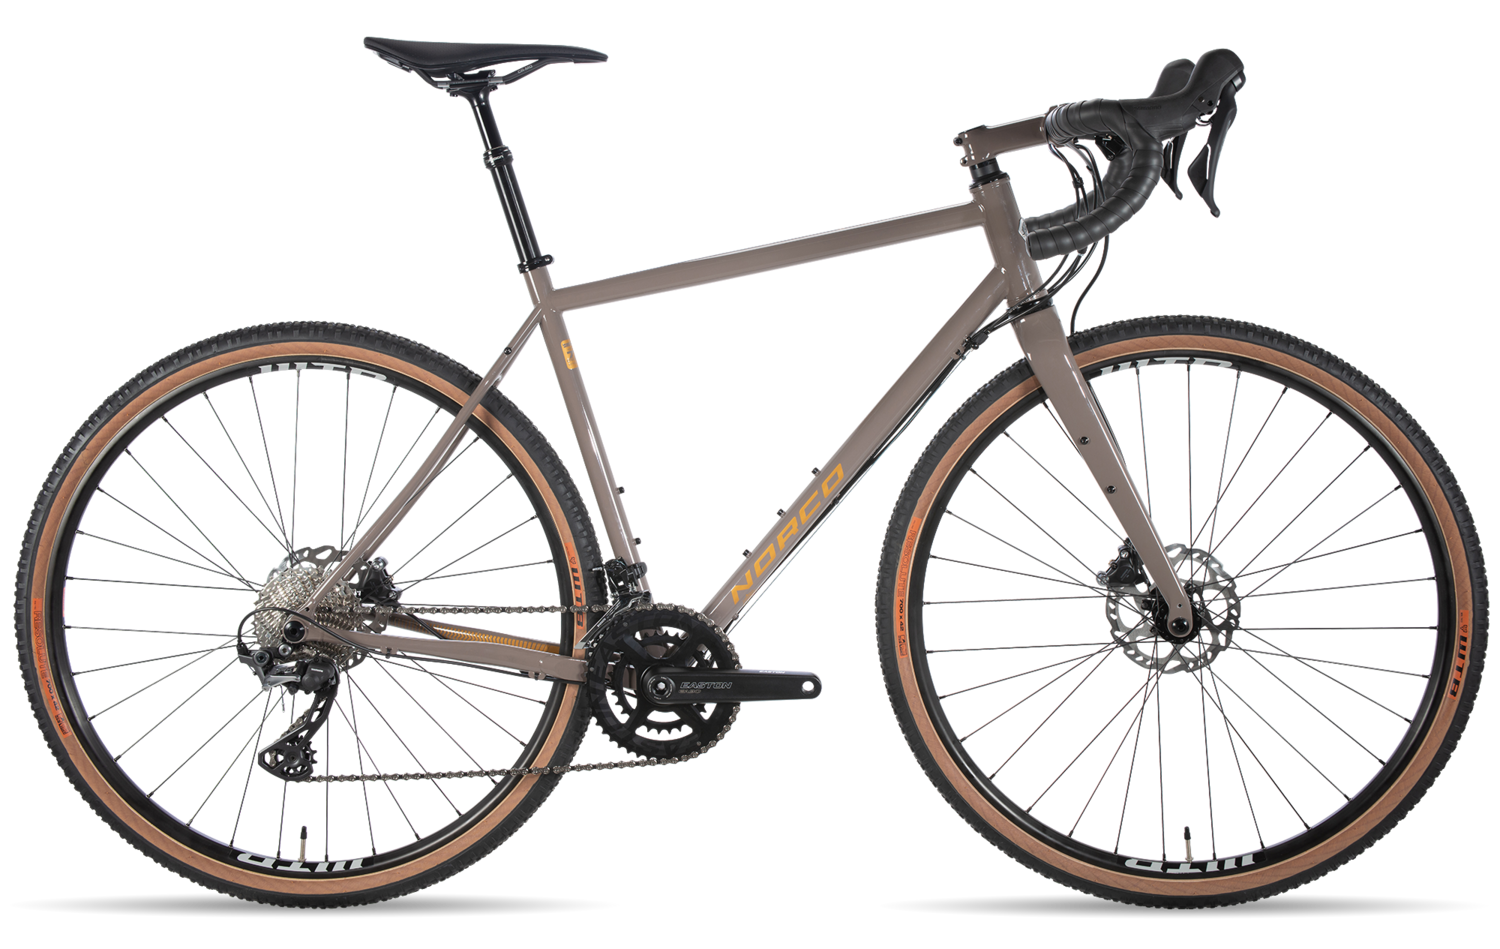 2020 - 2022 Norco search XR S1 -